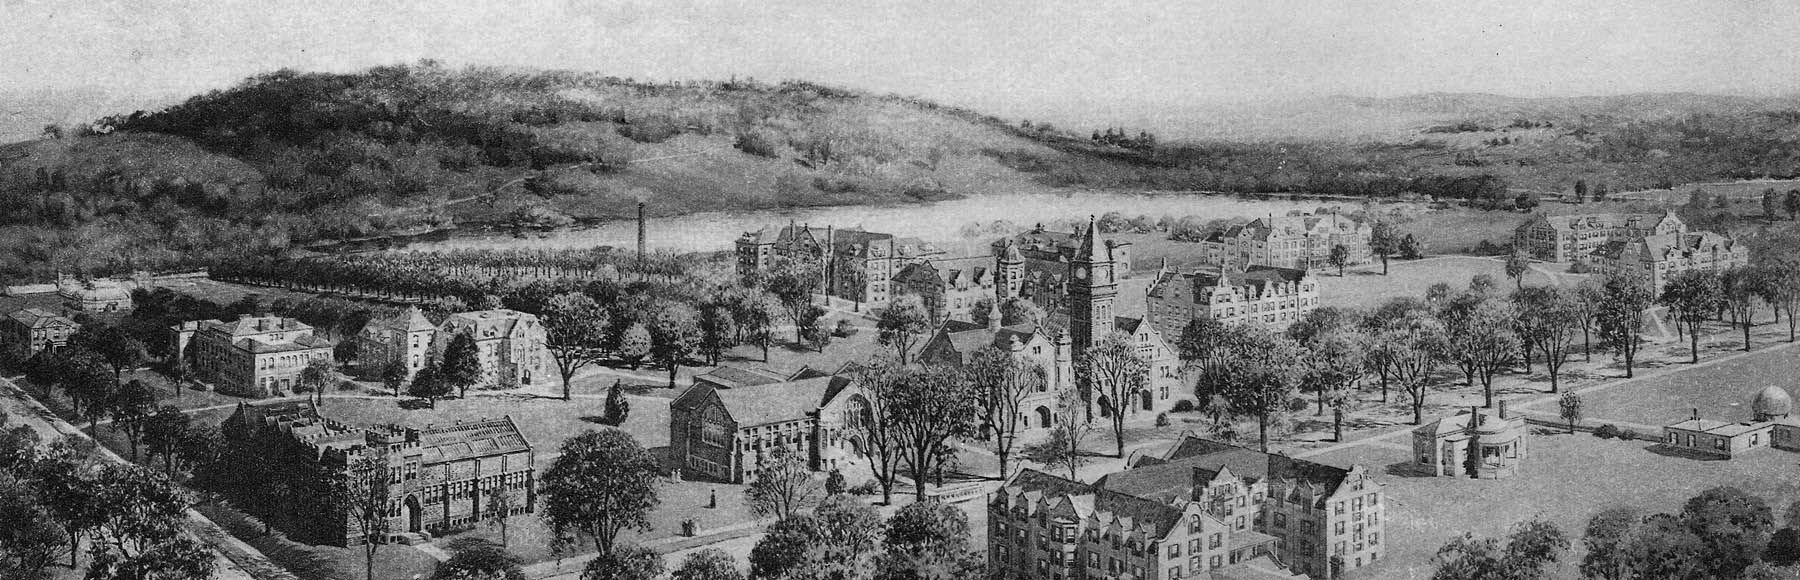 Black and white photo of Mount Holyoke's campus from the archives.